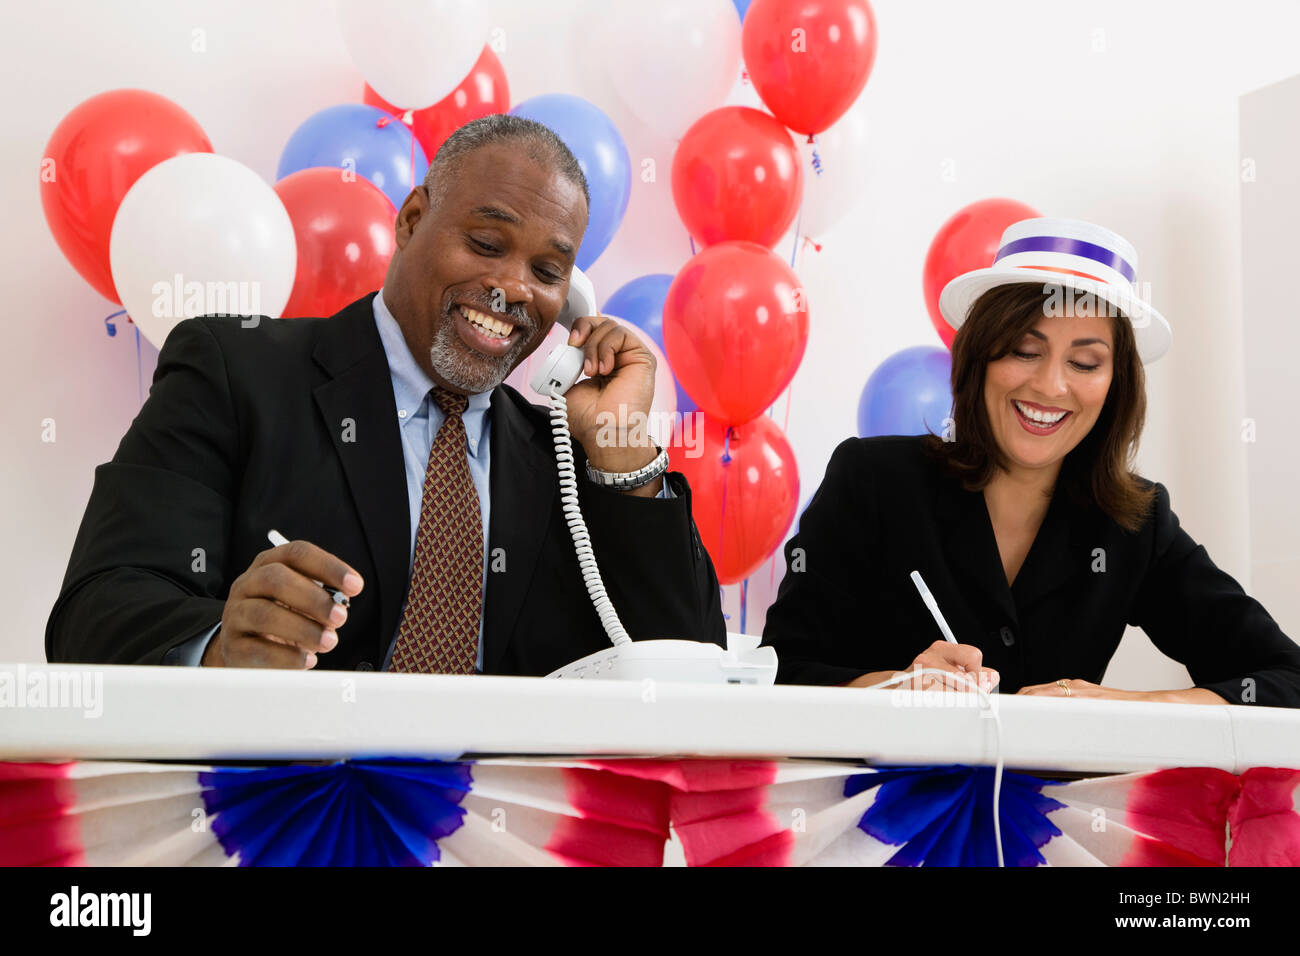 USA, Illinois, Metamora, Smiling man and woman at polling place table, red and blue balloons in background Stock Photo